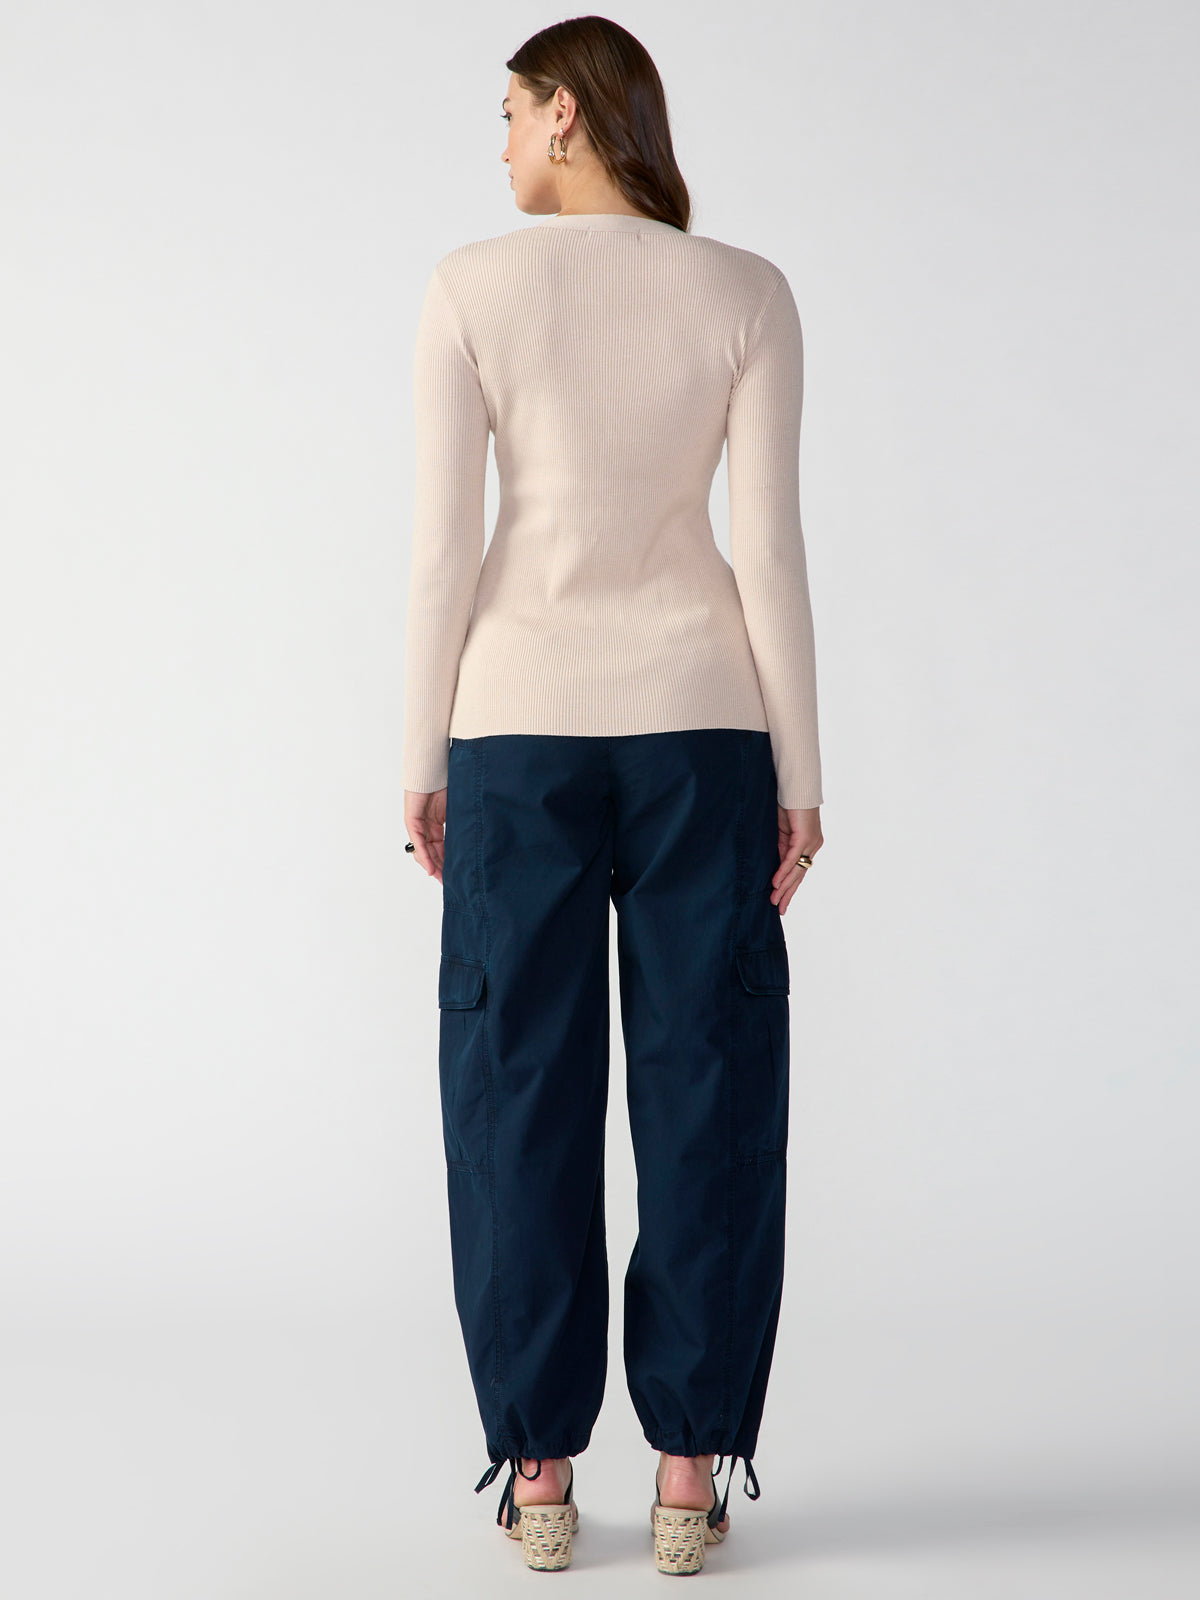 Canopy Semi High Rise Cargo Pant Navy Reflection